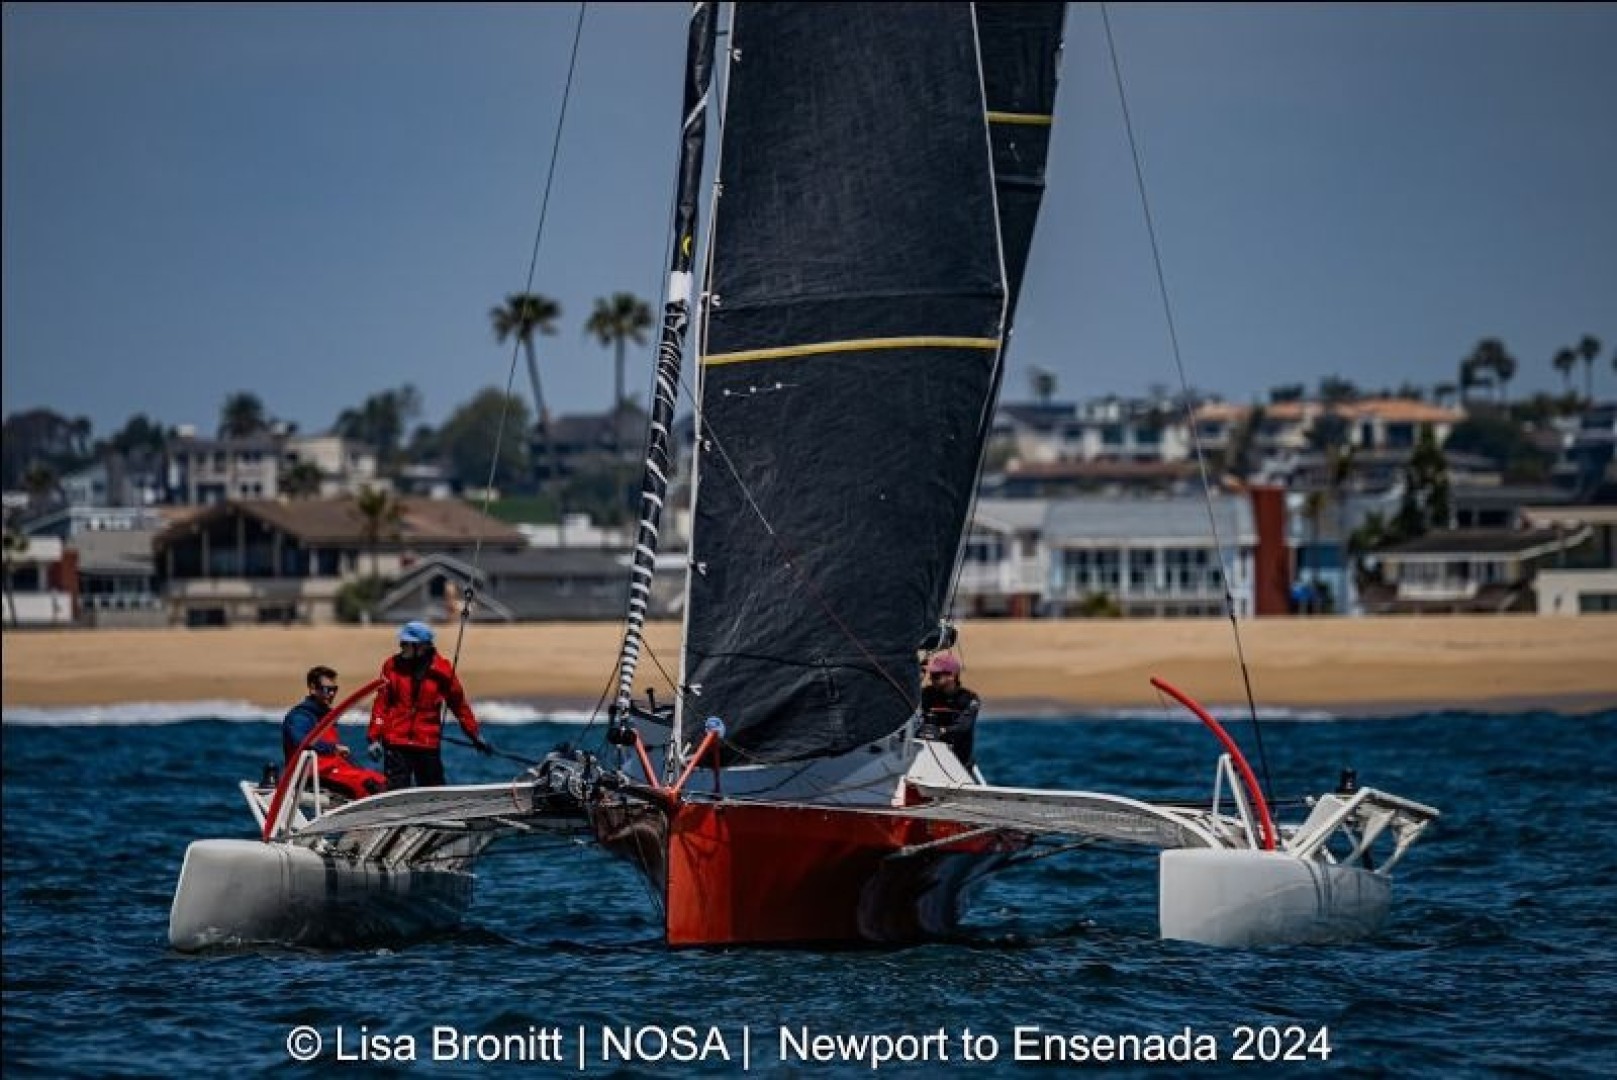 Taniwha, a Ferrier 32, at Friday's start.  They'd claim Fastest Elapsed Time honors and two trophies after temporarily losing a crewmember overboard.